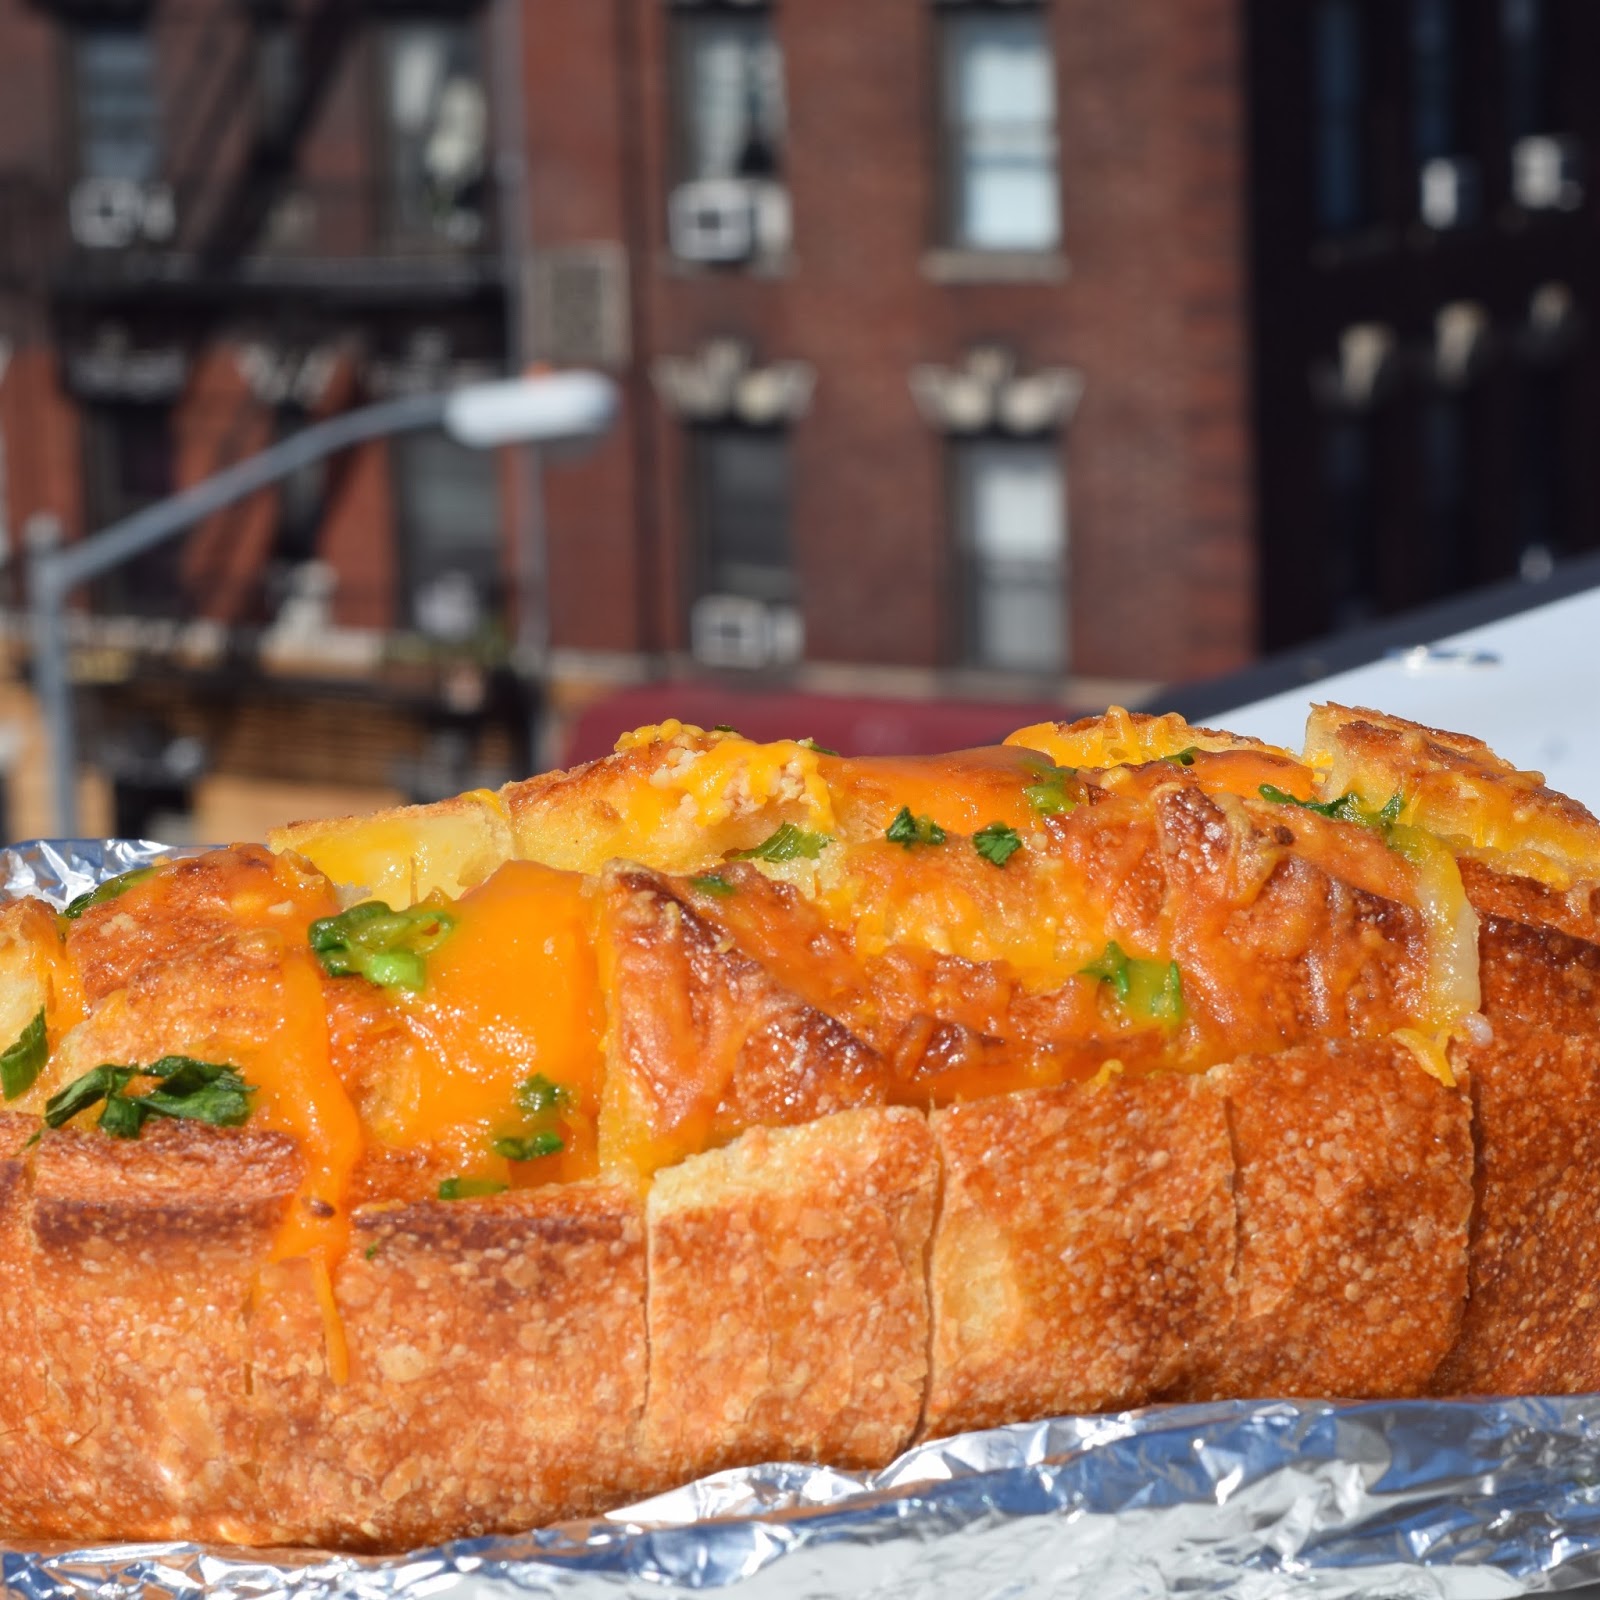 Public Lives: Bustle | Secret Recipes: Bloomin' Onion Cheesey Bread